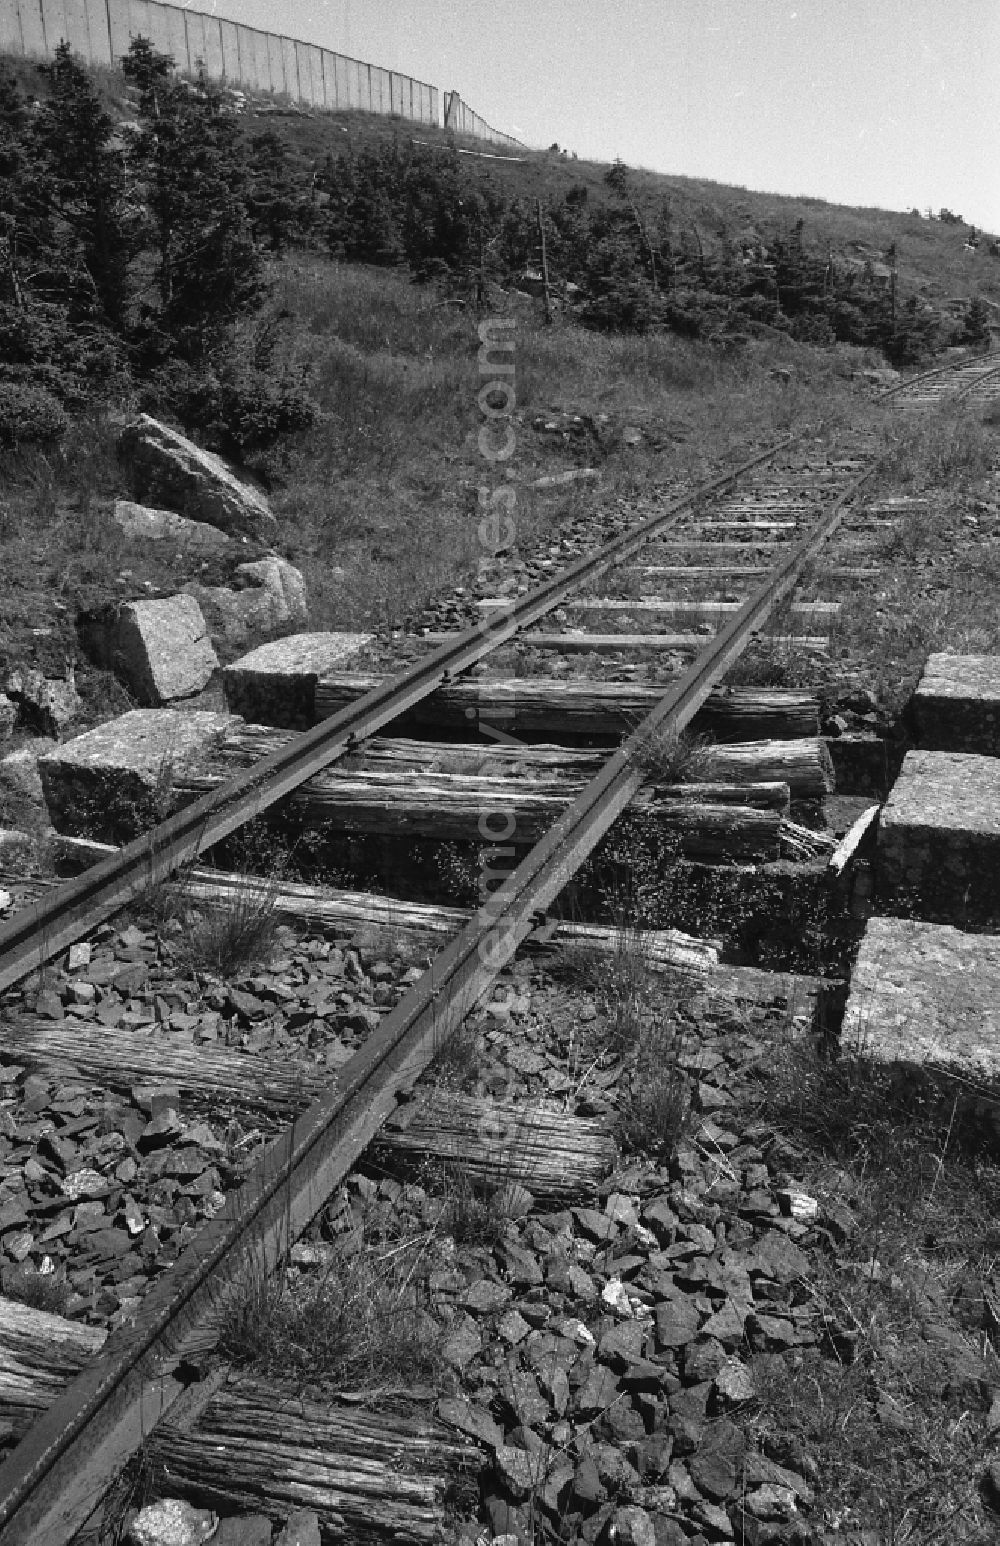 Schierke: Neglected track layout and track systems on the railway line on the summit plateau of the Brocken after its release for civilian visitor traffic in Schierke in the Harz in the state of Saxony-Anhalt in the area of the former GDR, German Democratic Republic